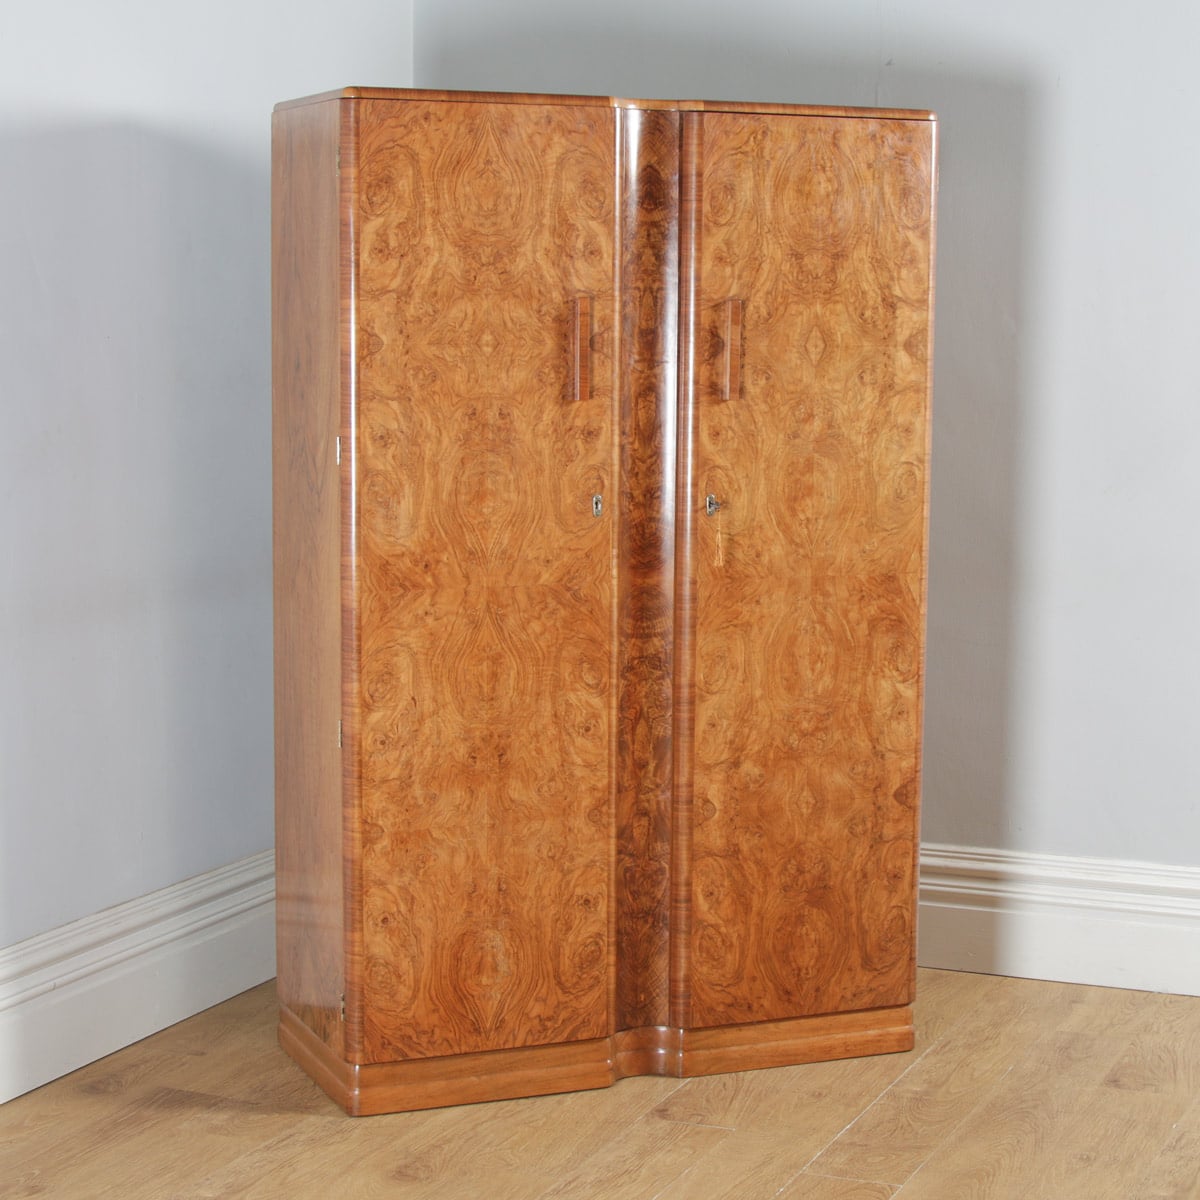 Details about   Antique Art Deco Burr Walnut 2 Door Armoire Wardrobe by Ray & Miles of Liverpool 